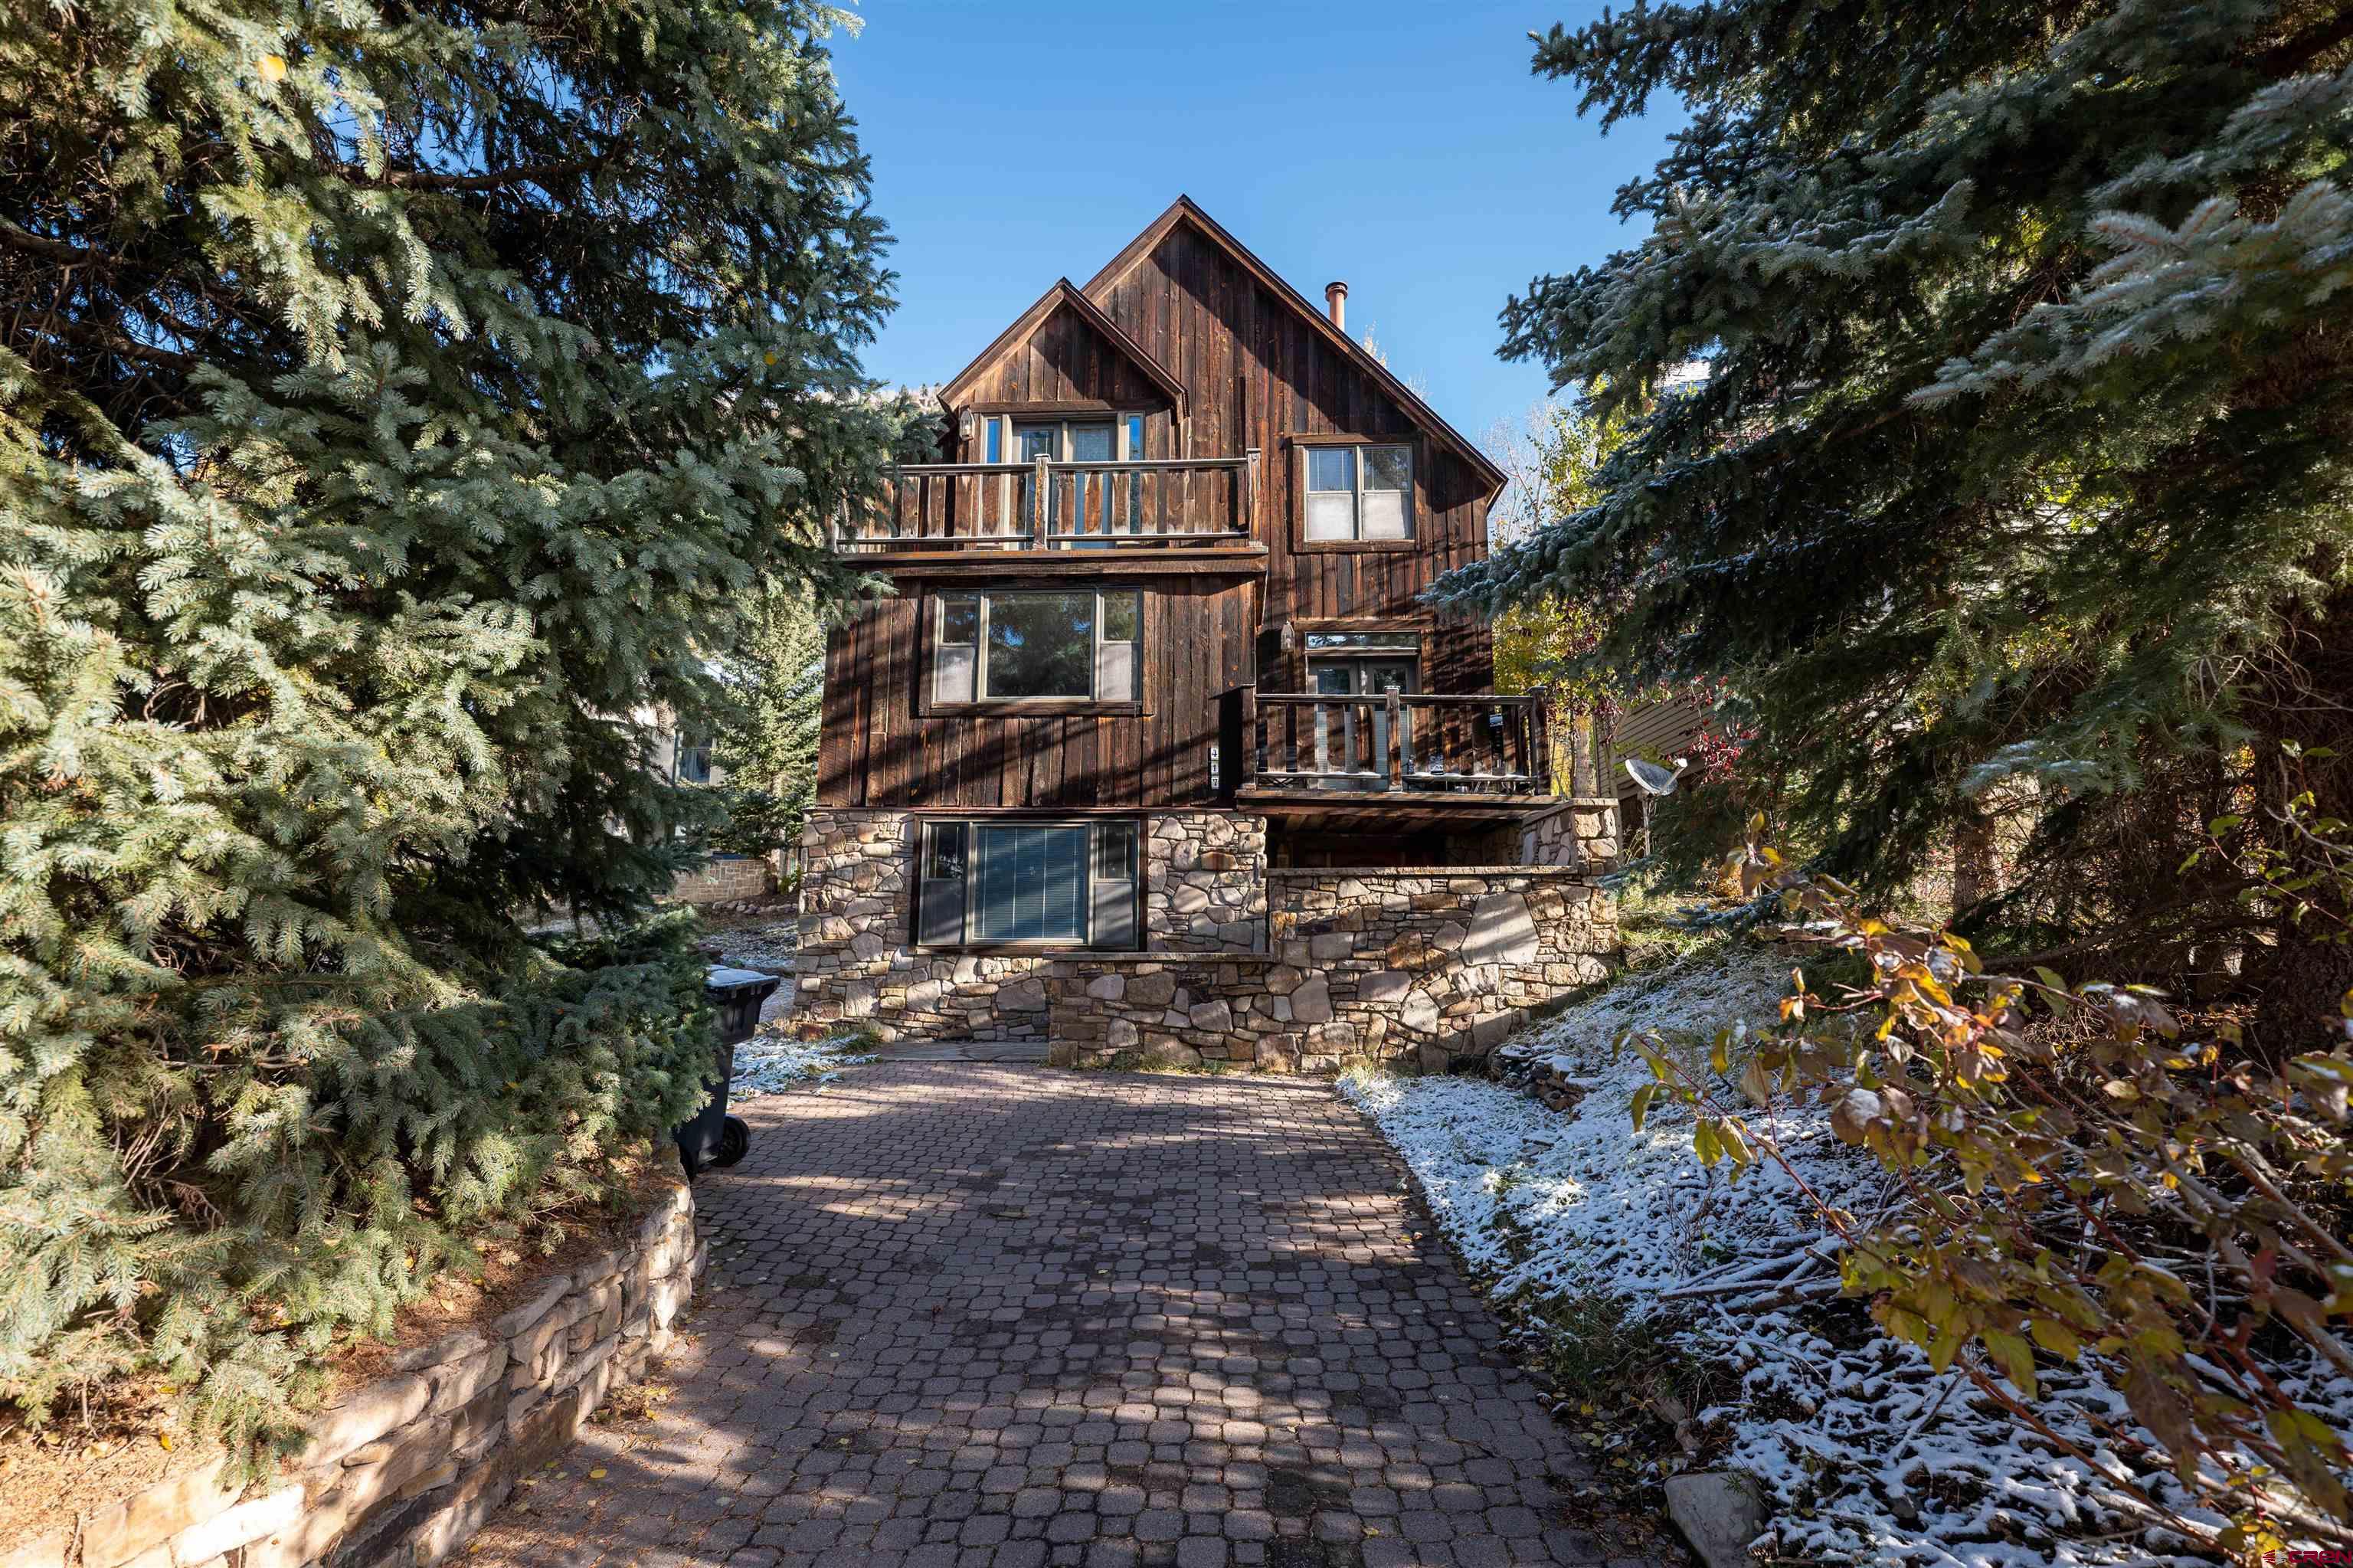 Sunshine and views in the heart of the historic core of Telluride. One of top builder Corey Fortenberry's first homes, built in 1986. Super well located on Galena Ave., between Aspen & Townsend Streets, a couple of blocks from Colorado Ave., the commercial district, ski lifts and Gondola. Three bedrooms, 2.5 baths within 2756 square feet. The 33' lot width provides for a comfortable interior layout, and the common private open space allows for a pleasant backyard. Transfer of Deed no sooner than January 17, 2022.   Listing & Location Info